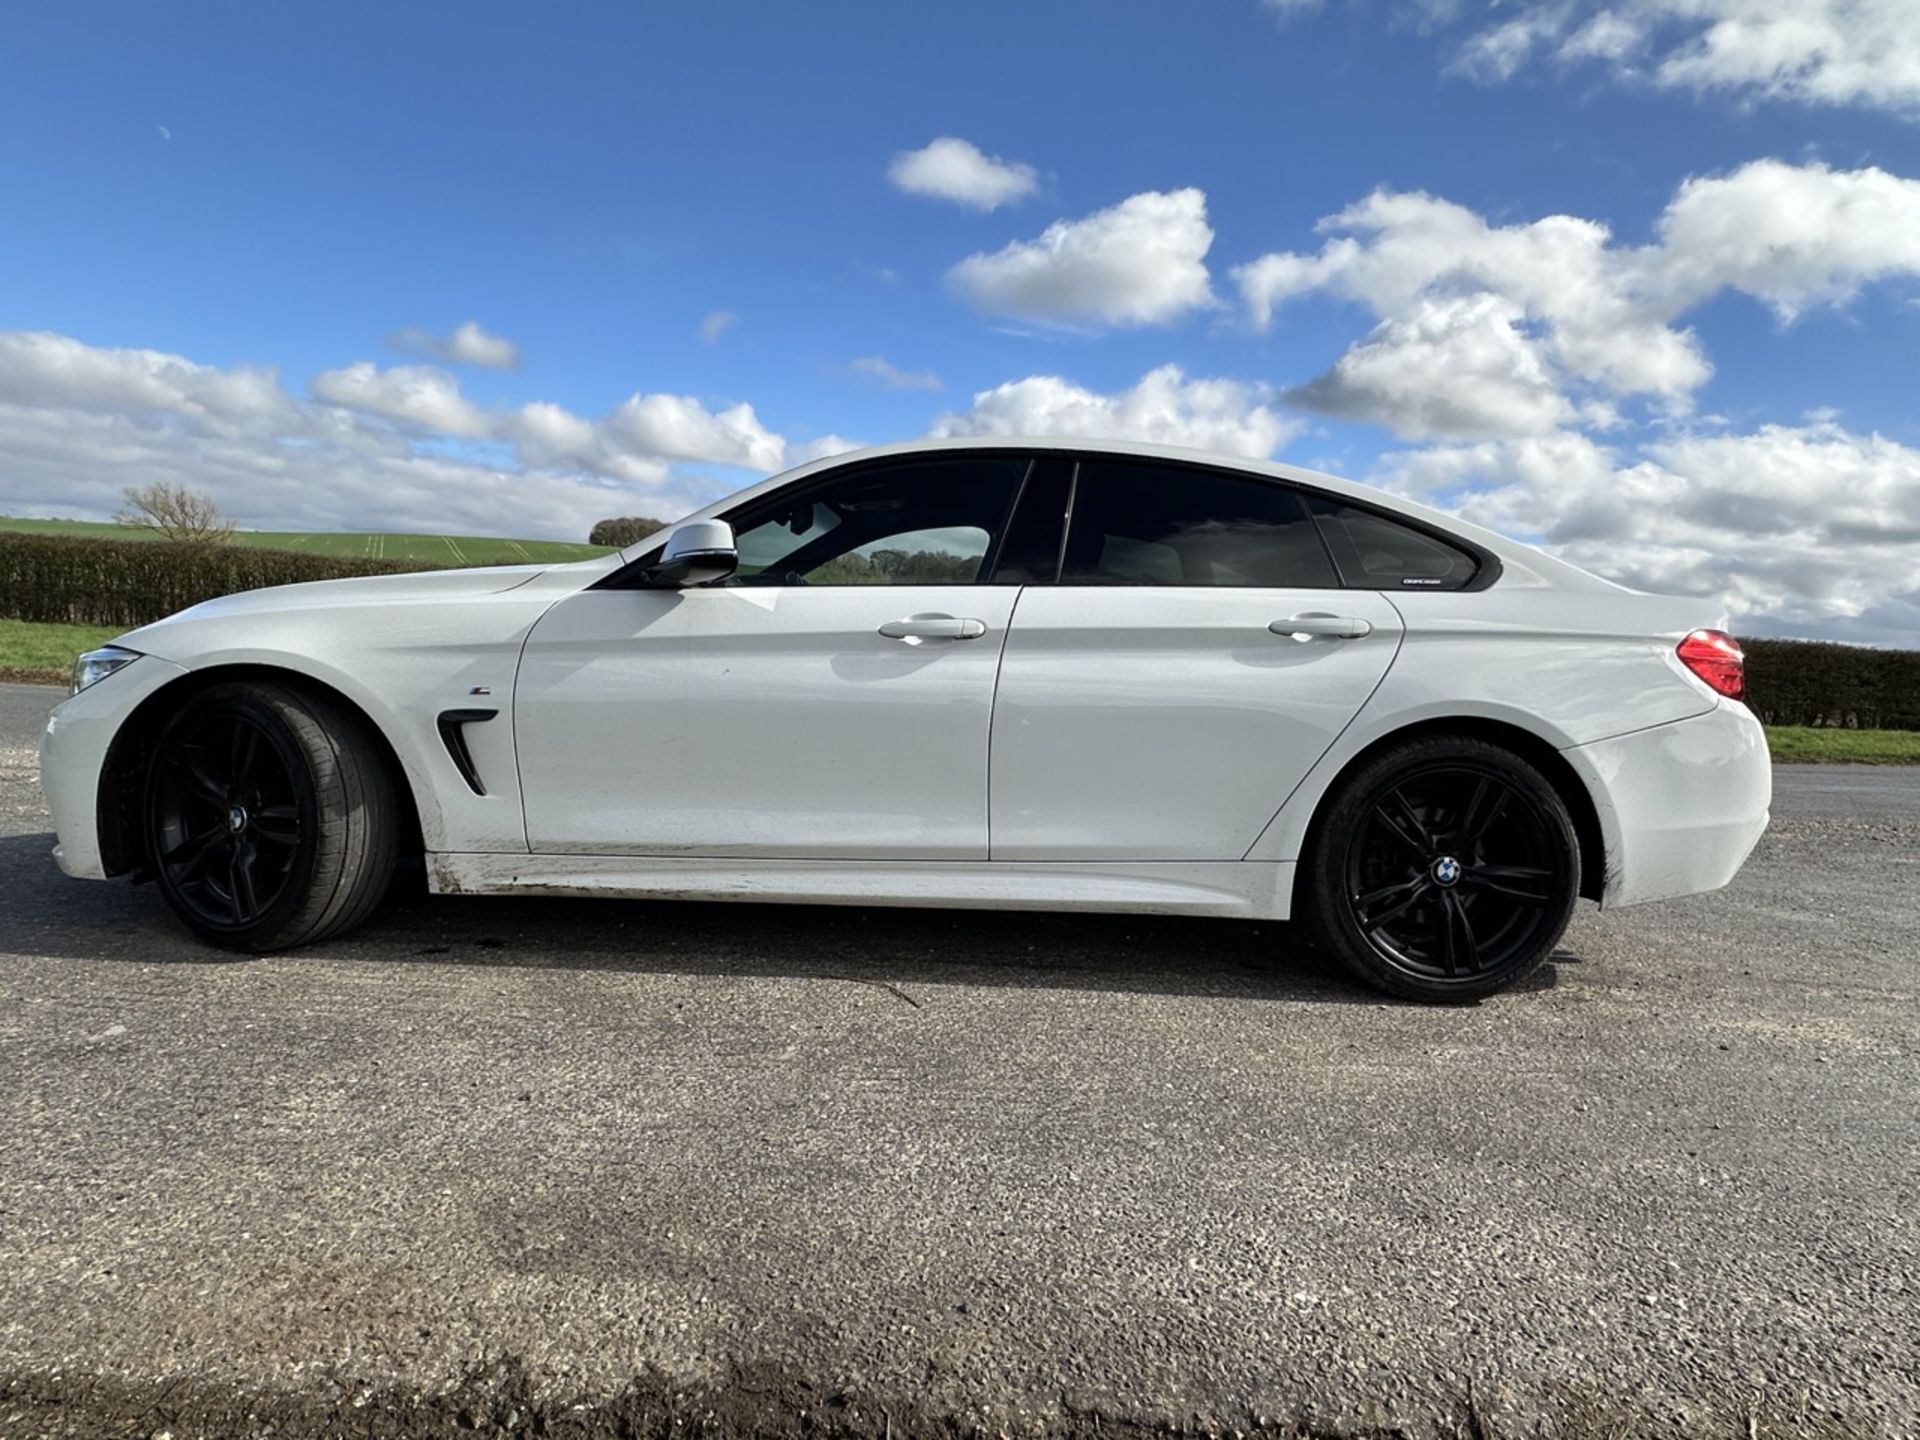 BMW 4 SERIES 420i M Sport 5dr [Professional Media] Manual - Petrol - 2.0 - Coupe- 54k miles - 2016 - Image 5 of 15